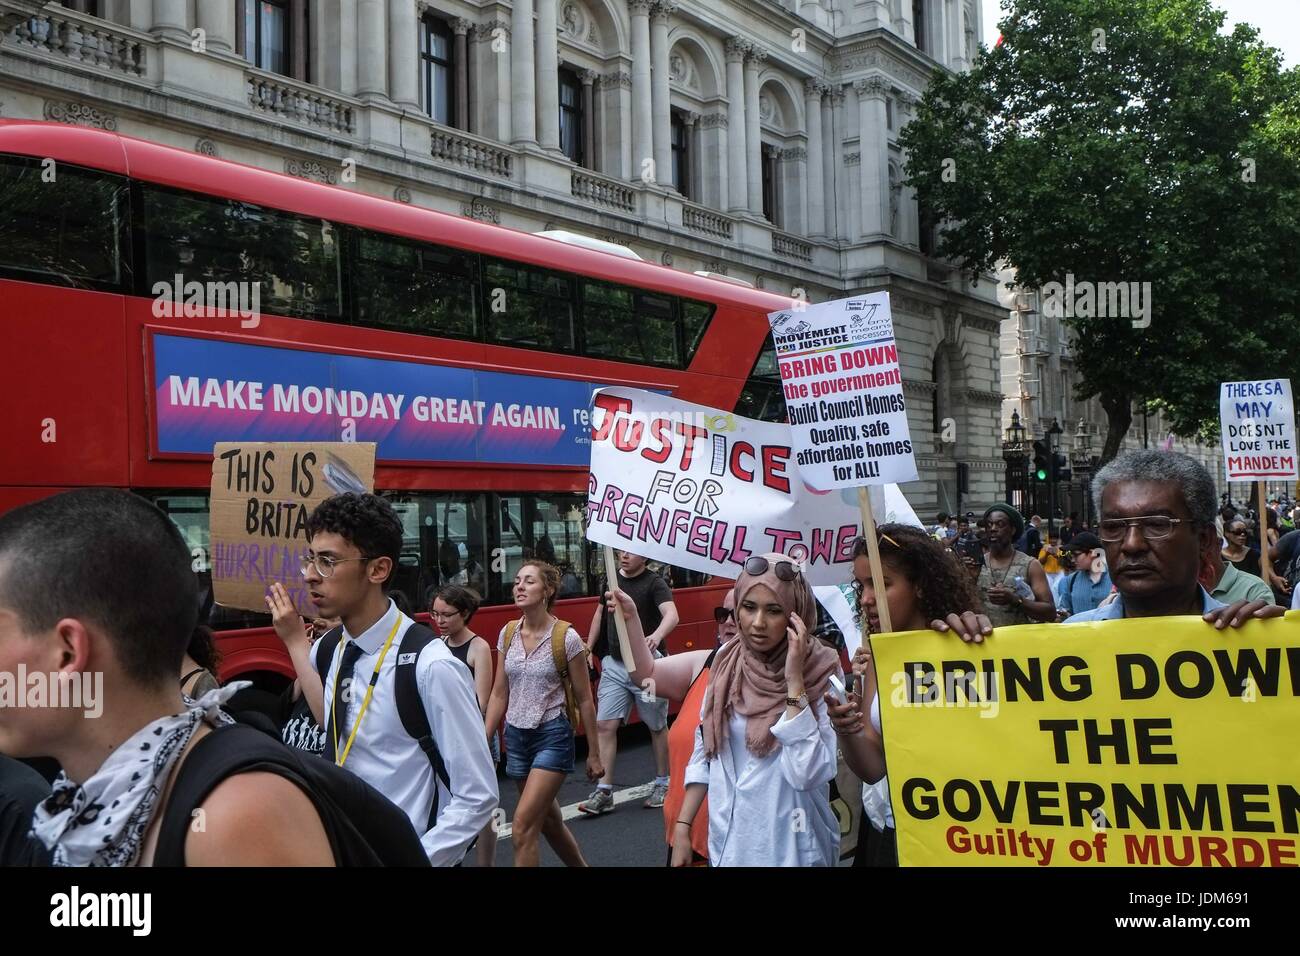 London, UK. 21st June, 2017. Day of Rage protesters march from Shepards Bush to Parliament demanding justice for the victims of the Grenfell Tower fire and Theresa Mays resignation. :Credit claire doherty Alamy/Live News. Stock Photo